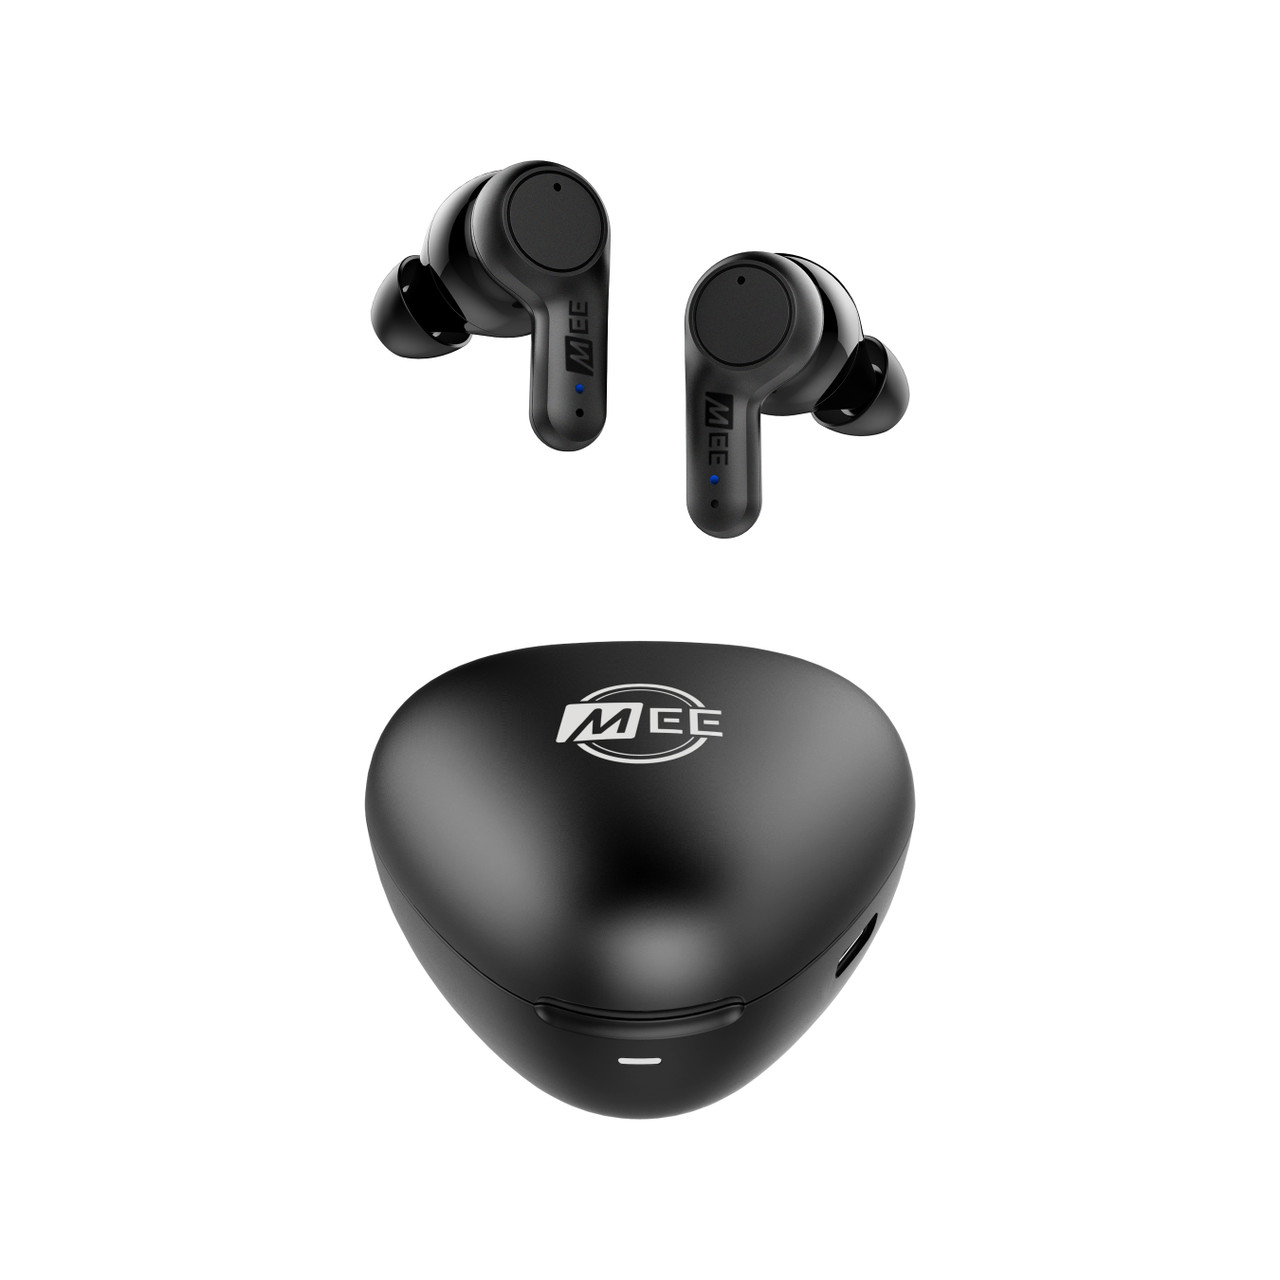 Basics Bluetooth 5.0 Earbuds, Up to 38 Hours Playtime, IPX